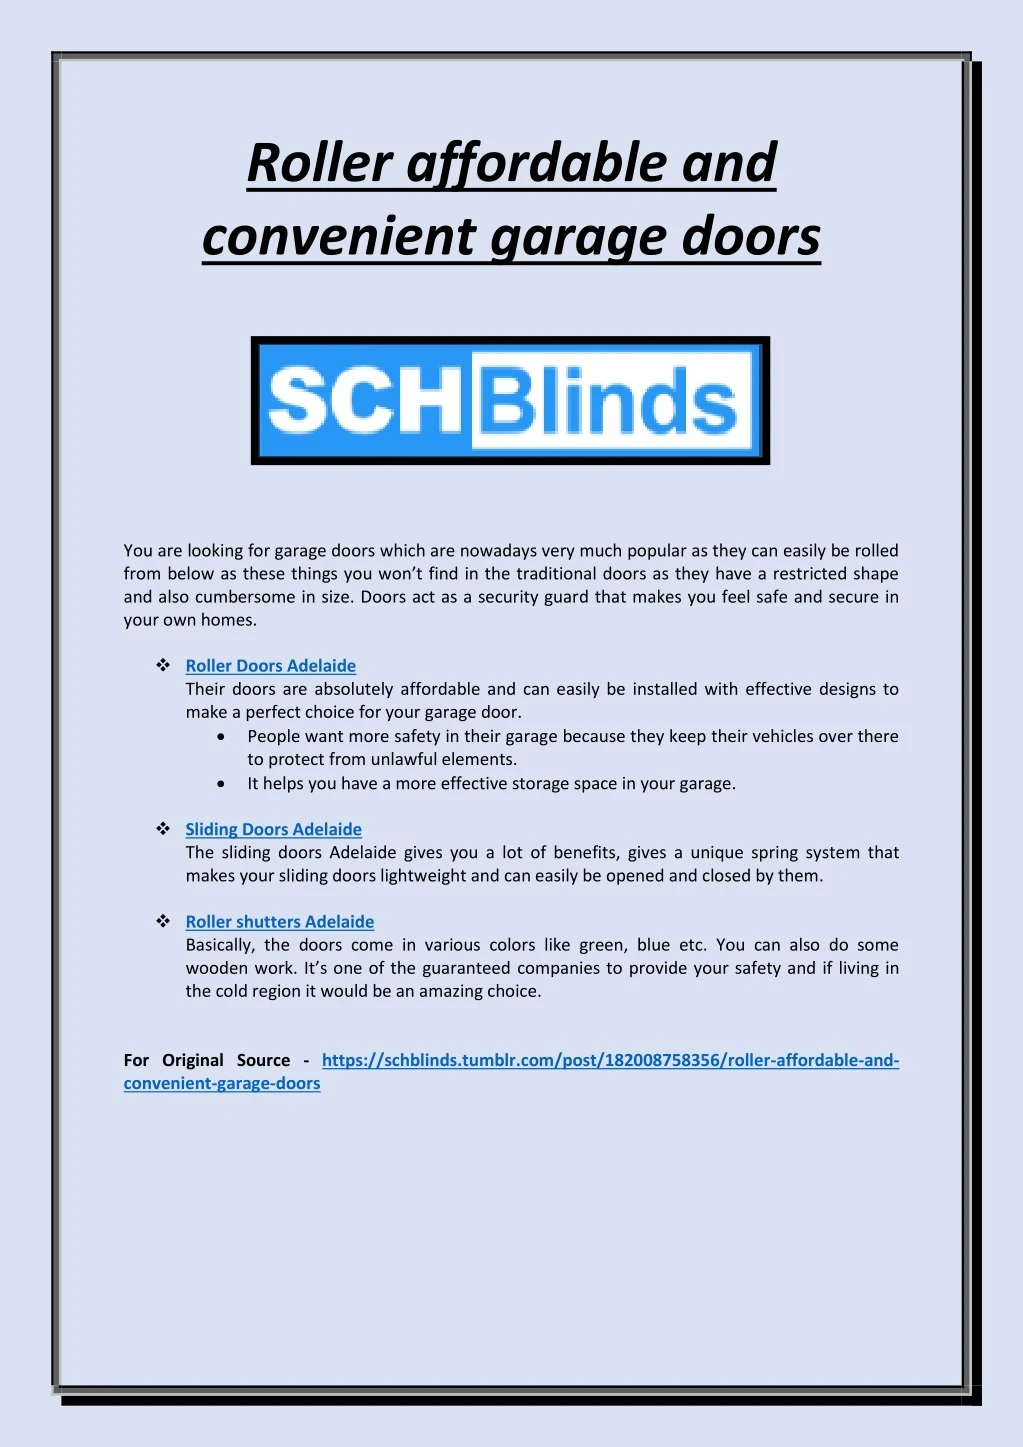 roller affordable and convenient garage doors